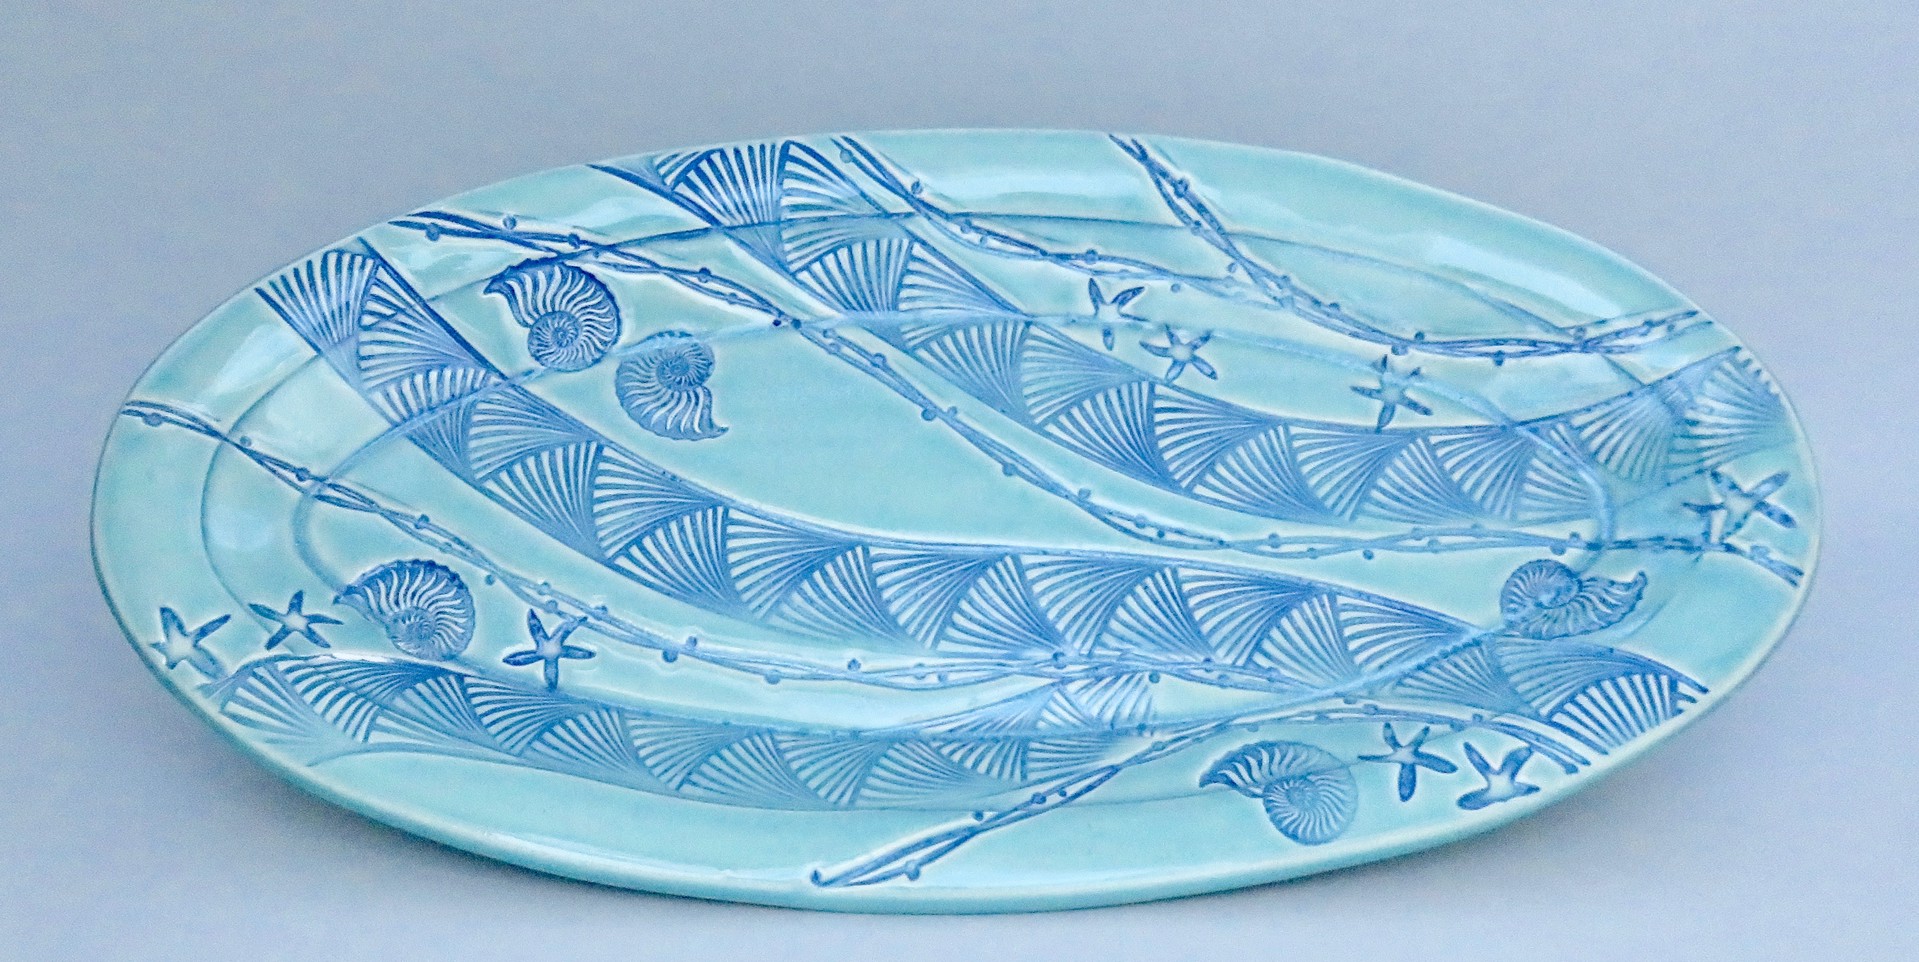 Oblong Tray - Imprint Soft Turquoise - M#412 by Marty Biernbaum